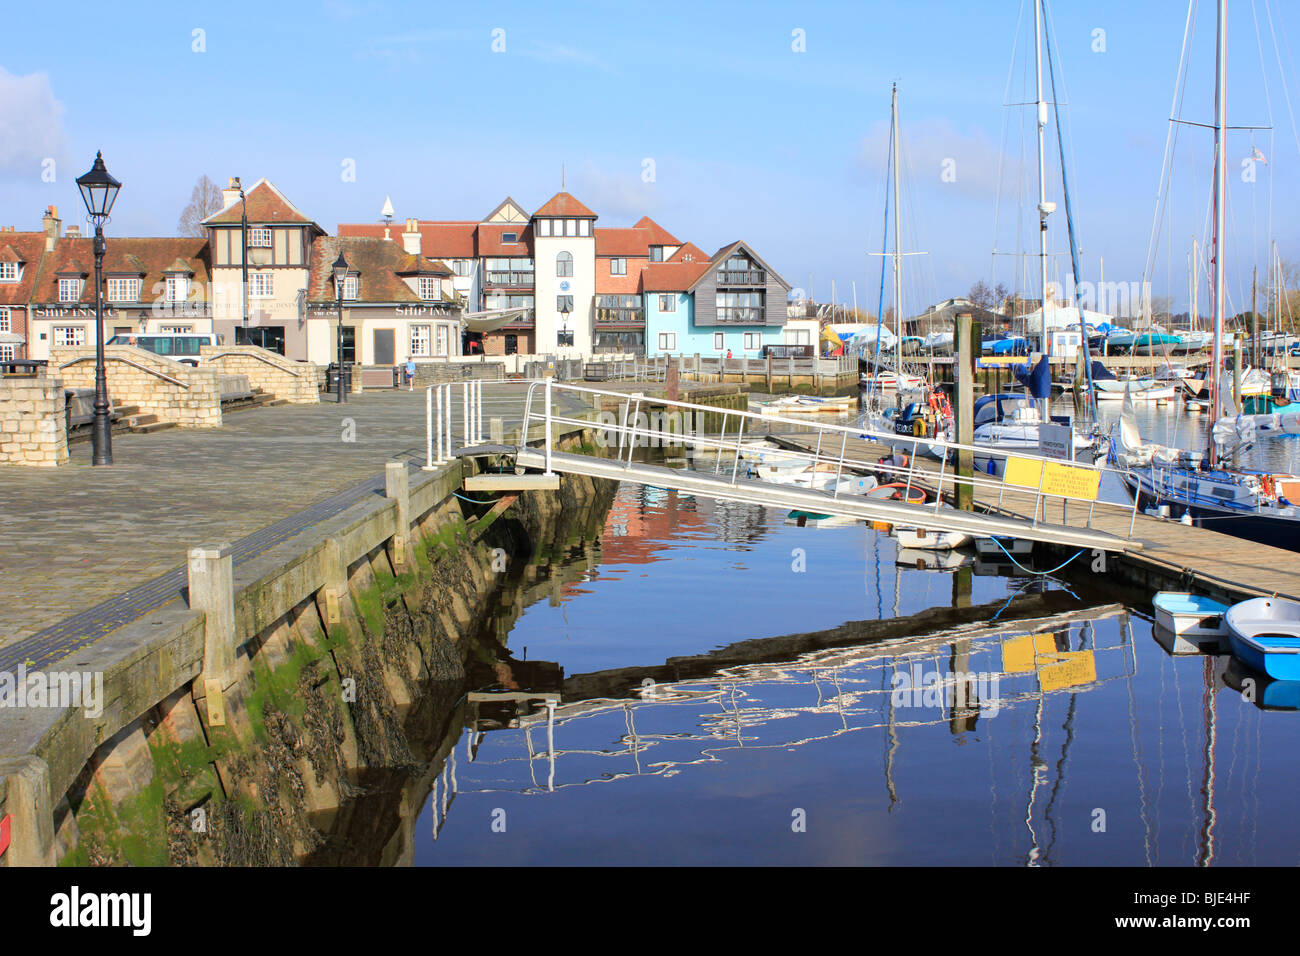 Lymington new forest town centre hampshire england uk gb Stock Photo